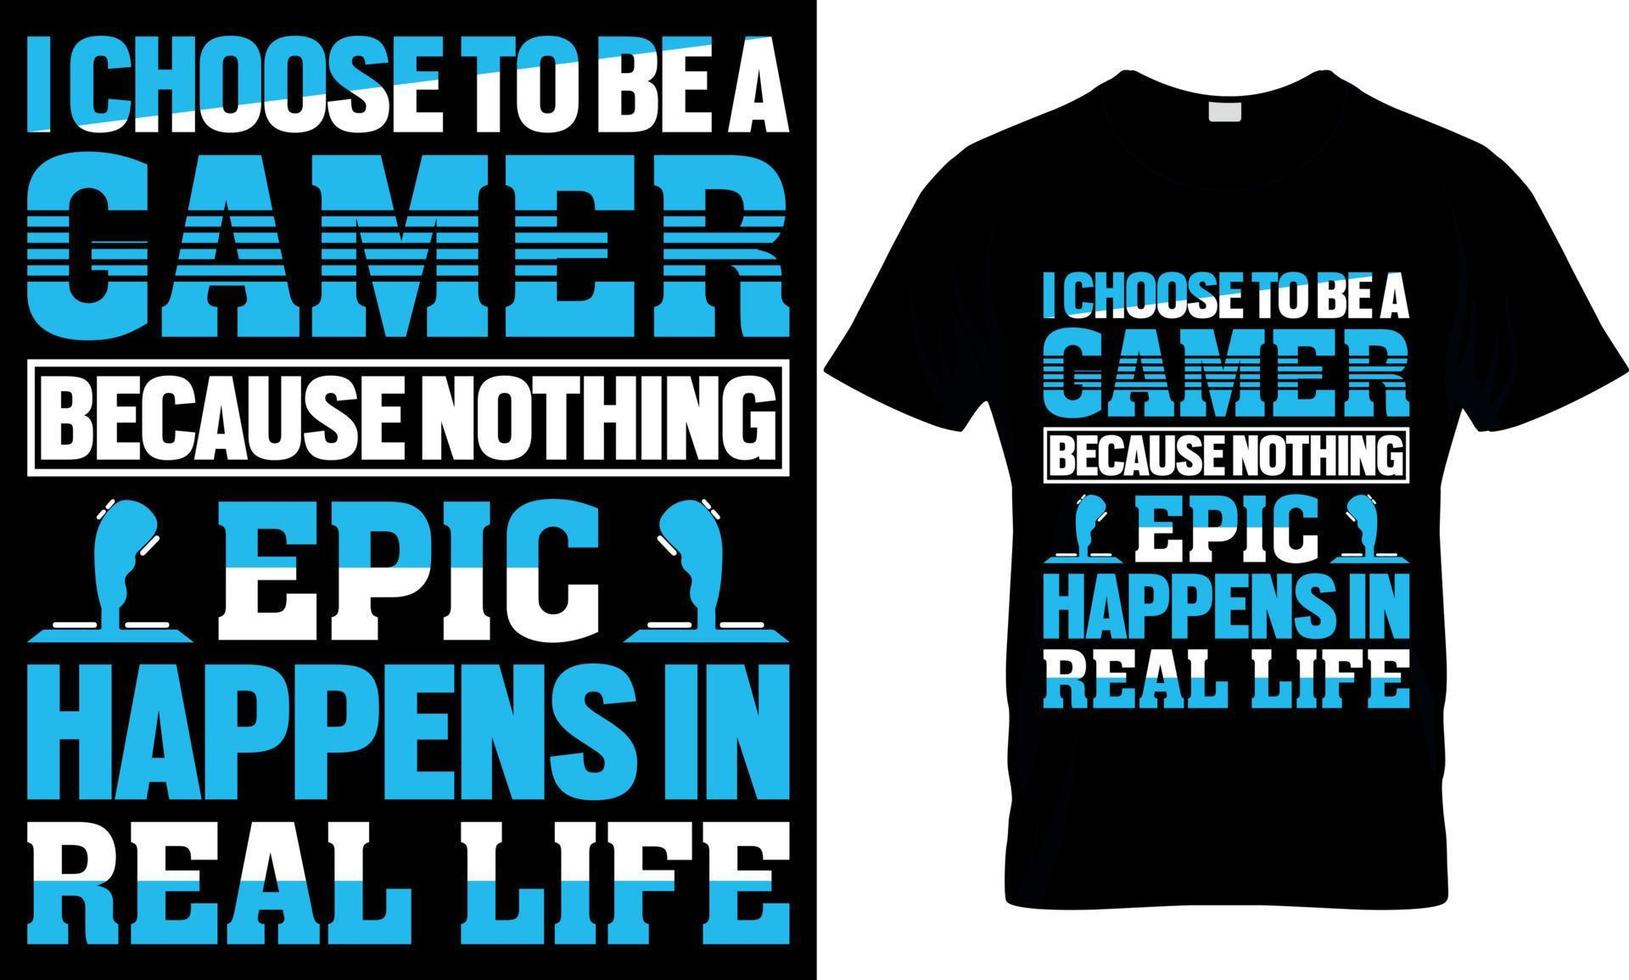 gaming t-shirt design. gaming t shirt design. game design. game t shirt design.games t shirt design. i choose to be a gamer because nothing epic happens in real life vector